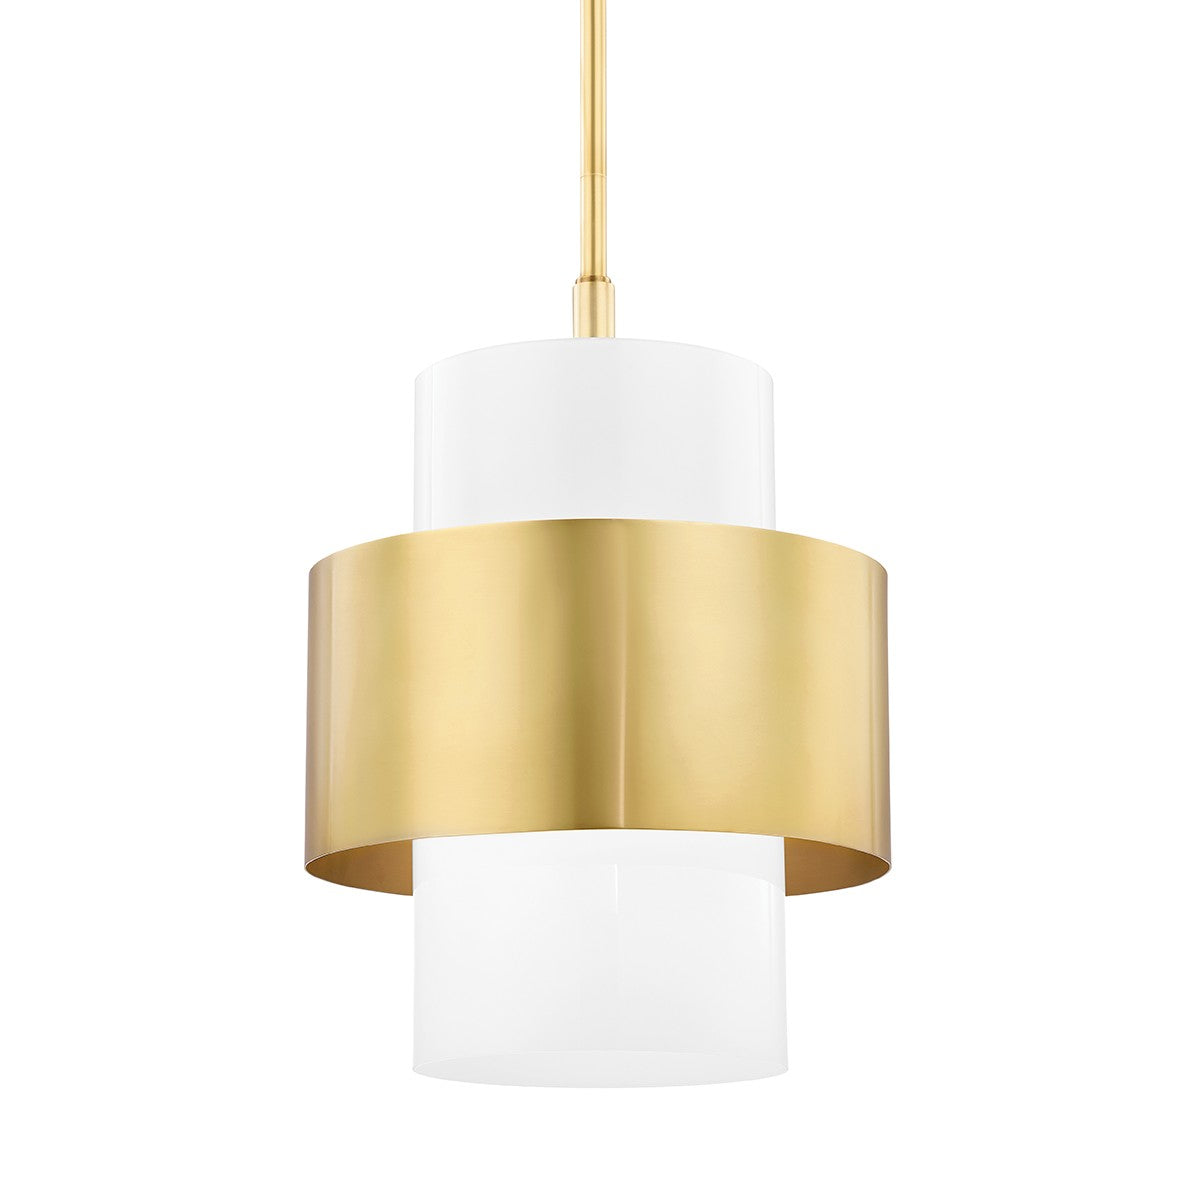 Hudson Valley - 8615-AGB - One Light Pendant - Corinth - Aged Brass